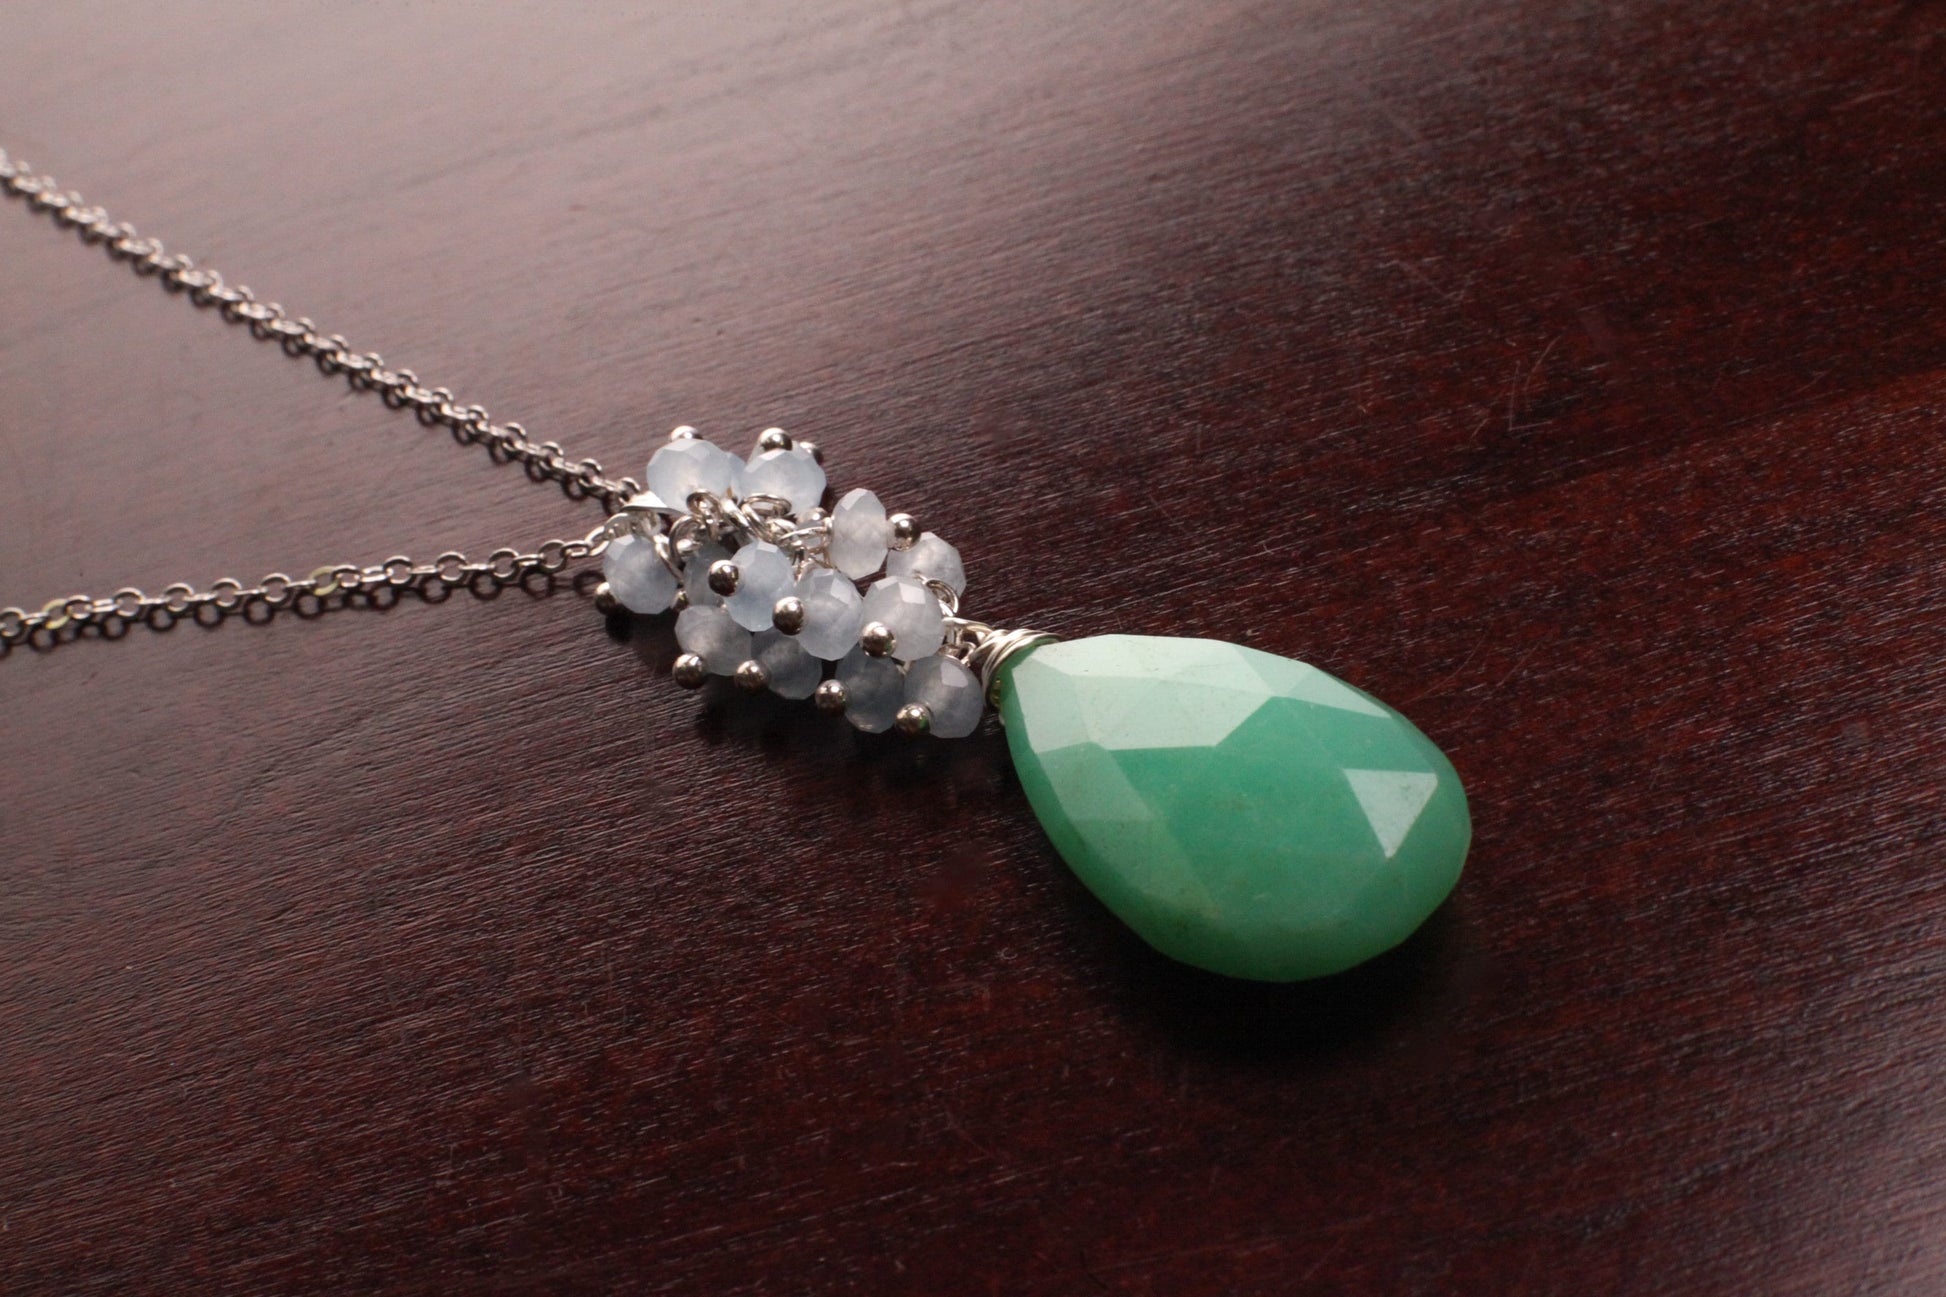 Natural Chrysoprase large Teardrop 16x26mm dangling with Aquamarine clusters 925 Sterling Silver elegant necklace. Rare one of a kind drop